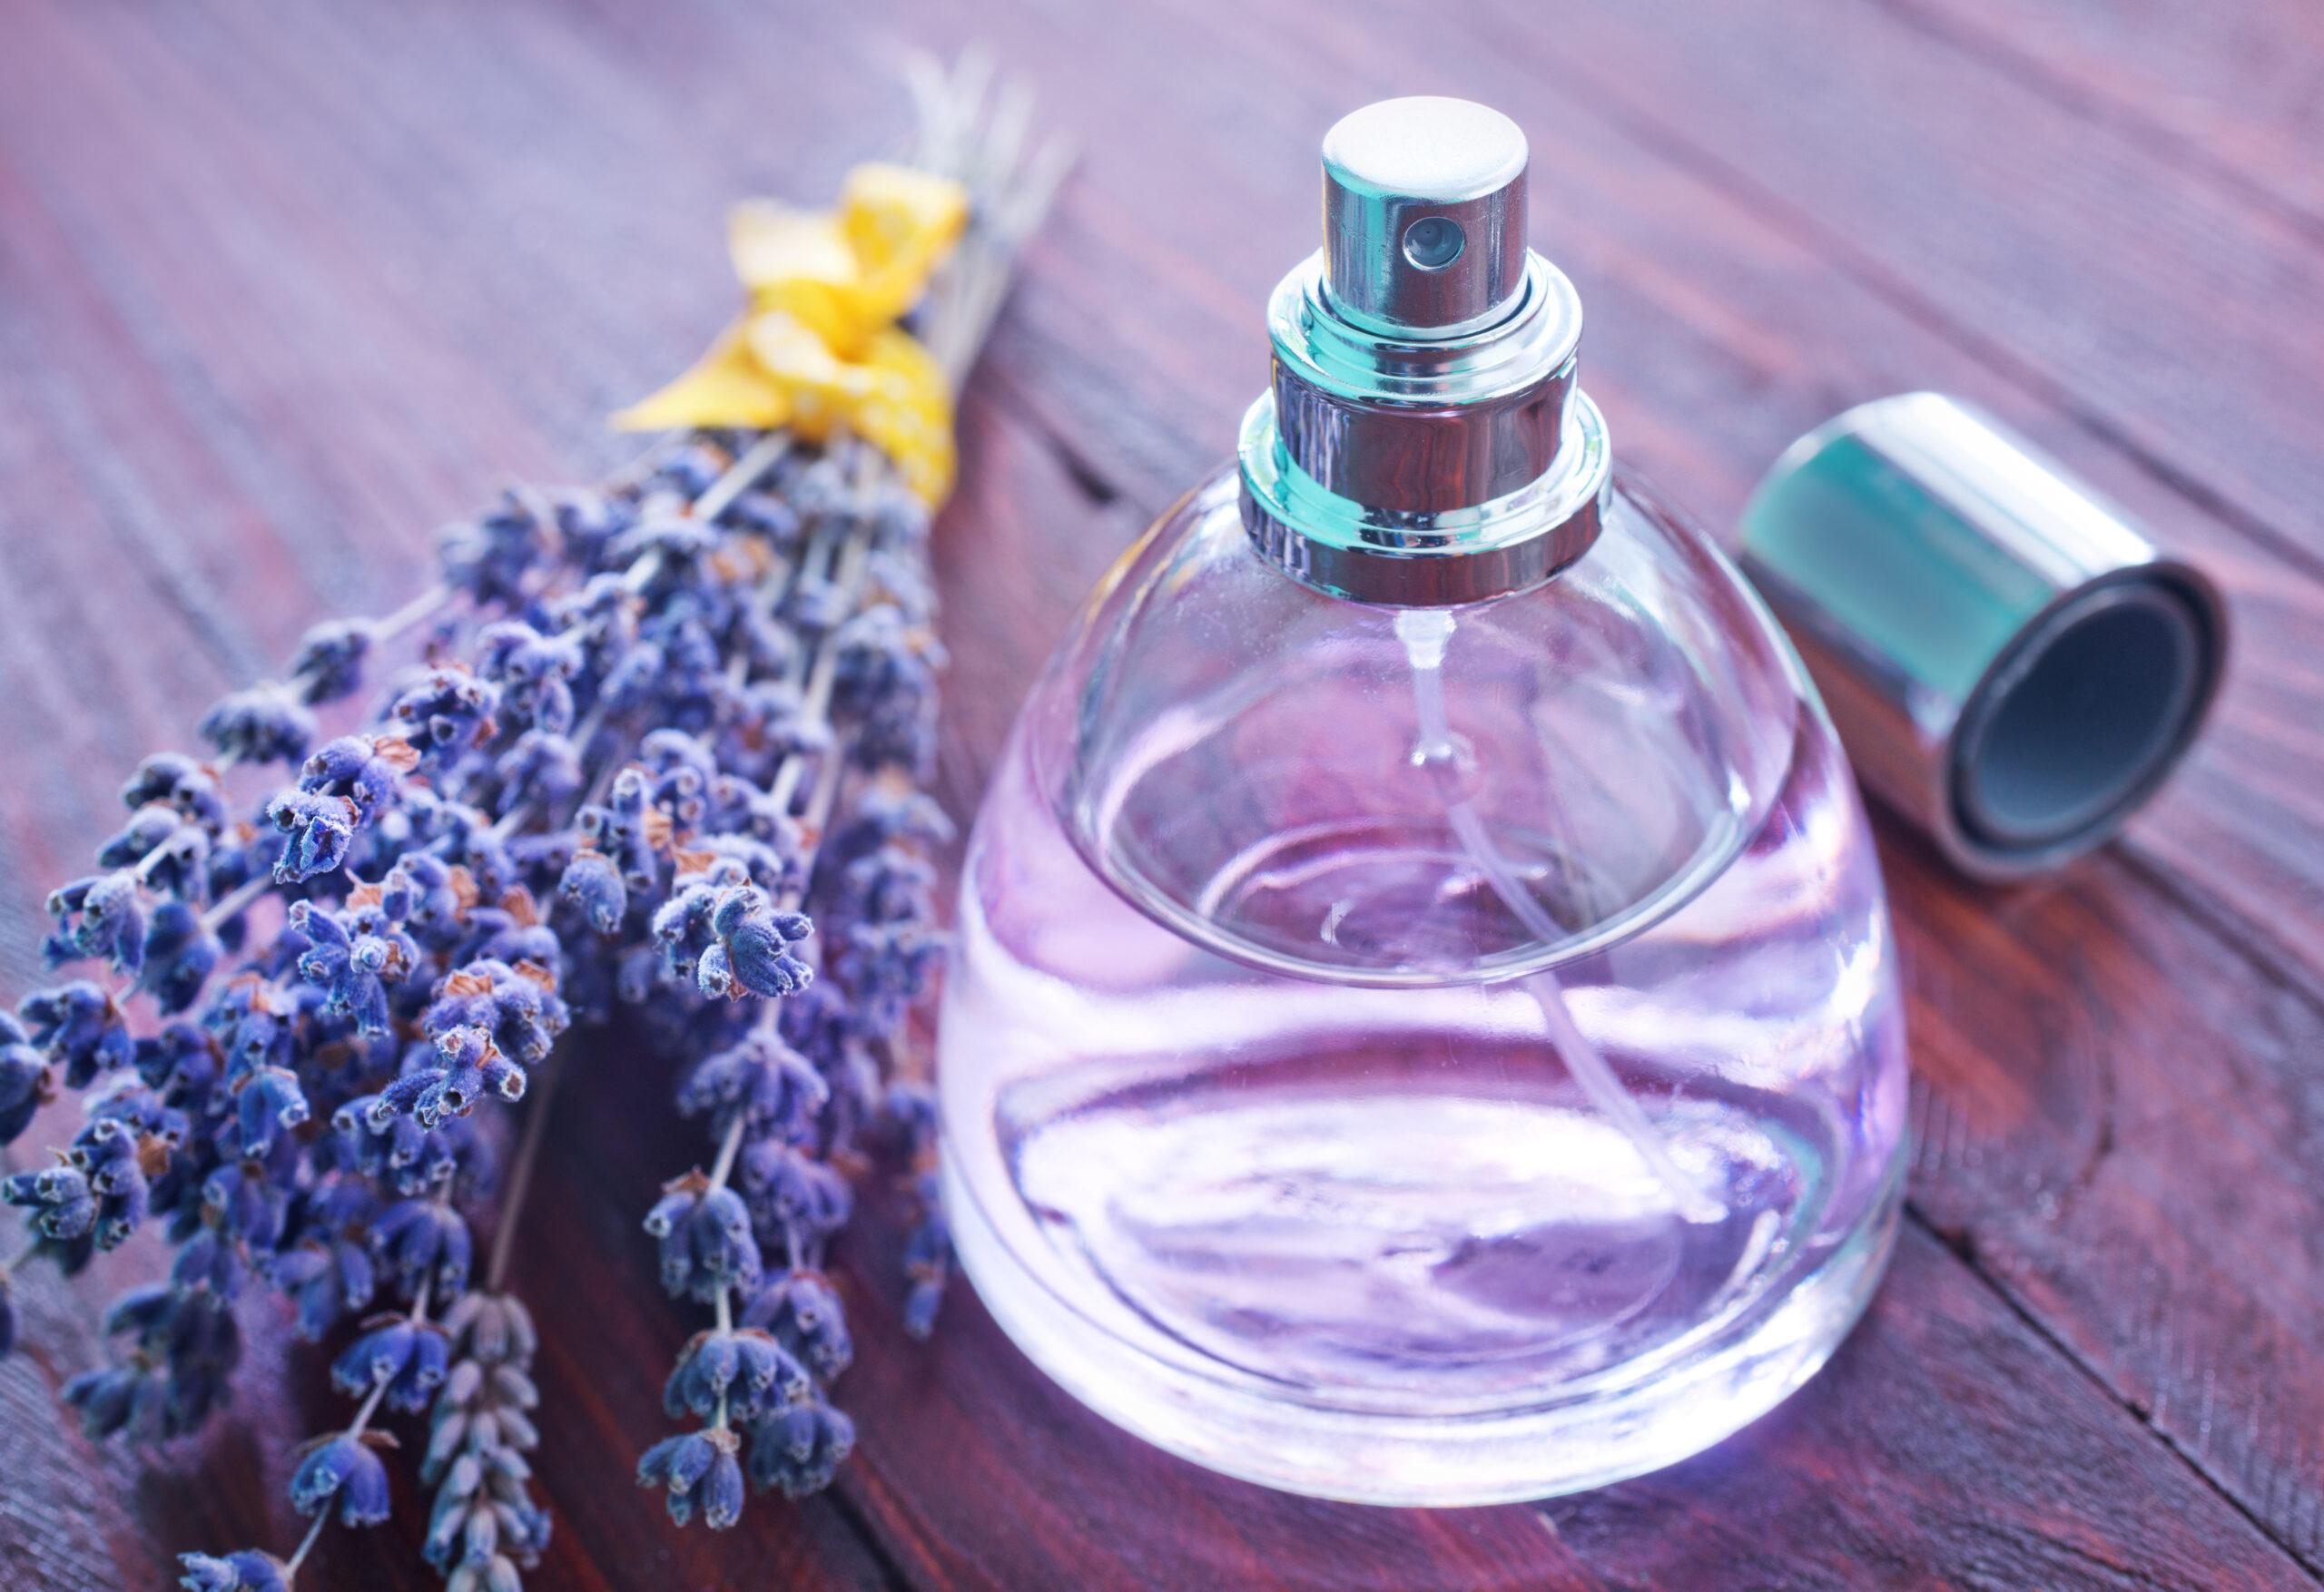 CAN I MAKE PERFUME WITH ESSENTIAL OILS? EASY DIY FRAGRANCE